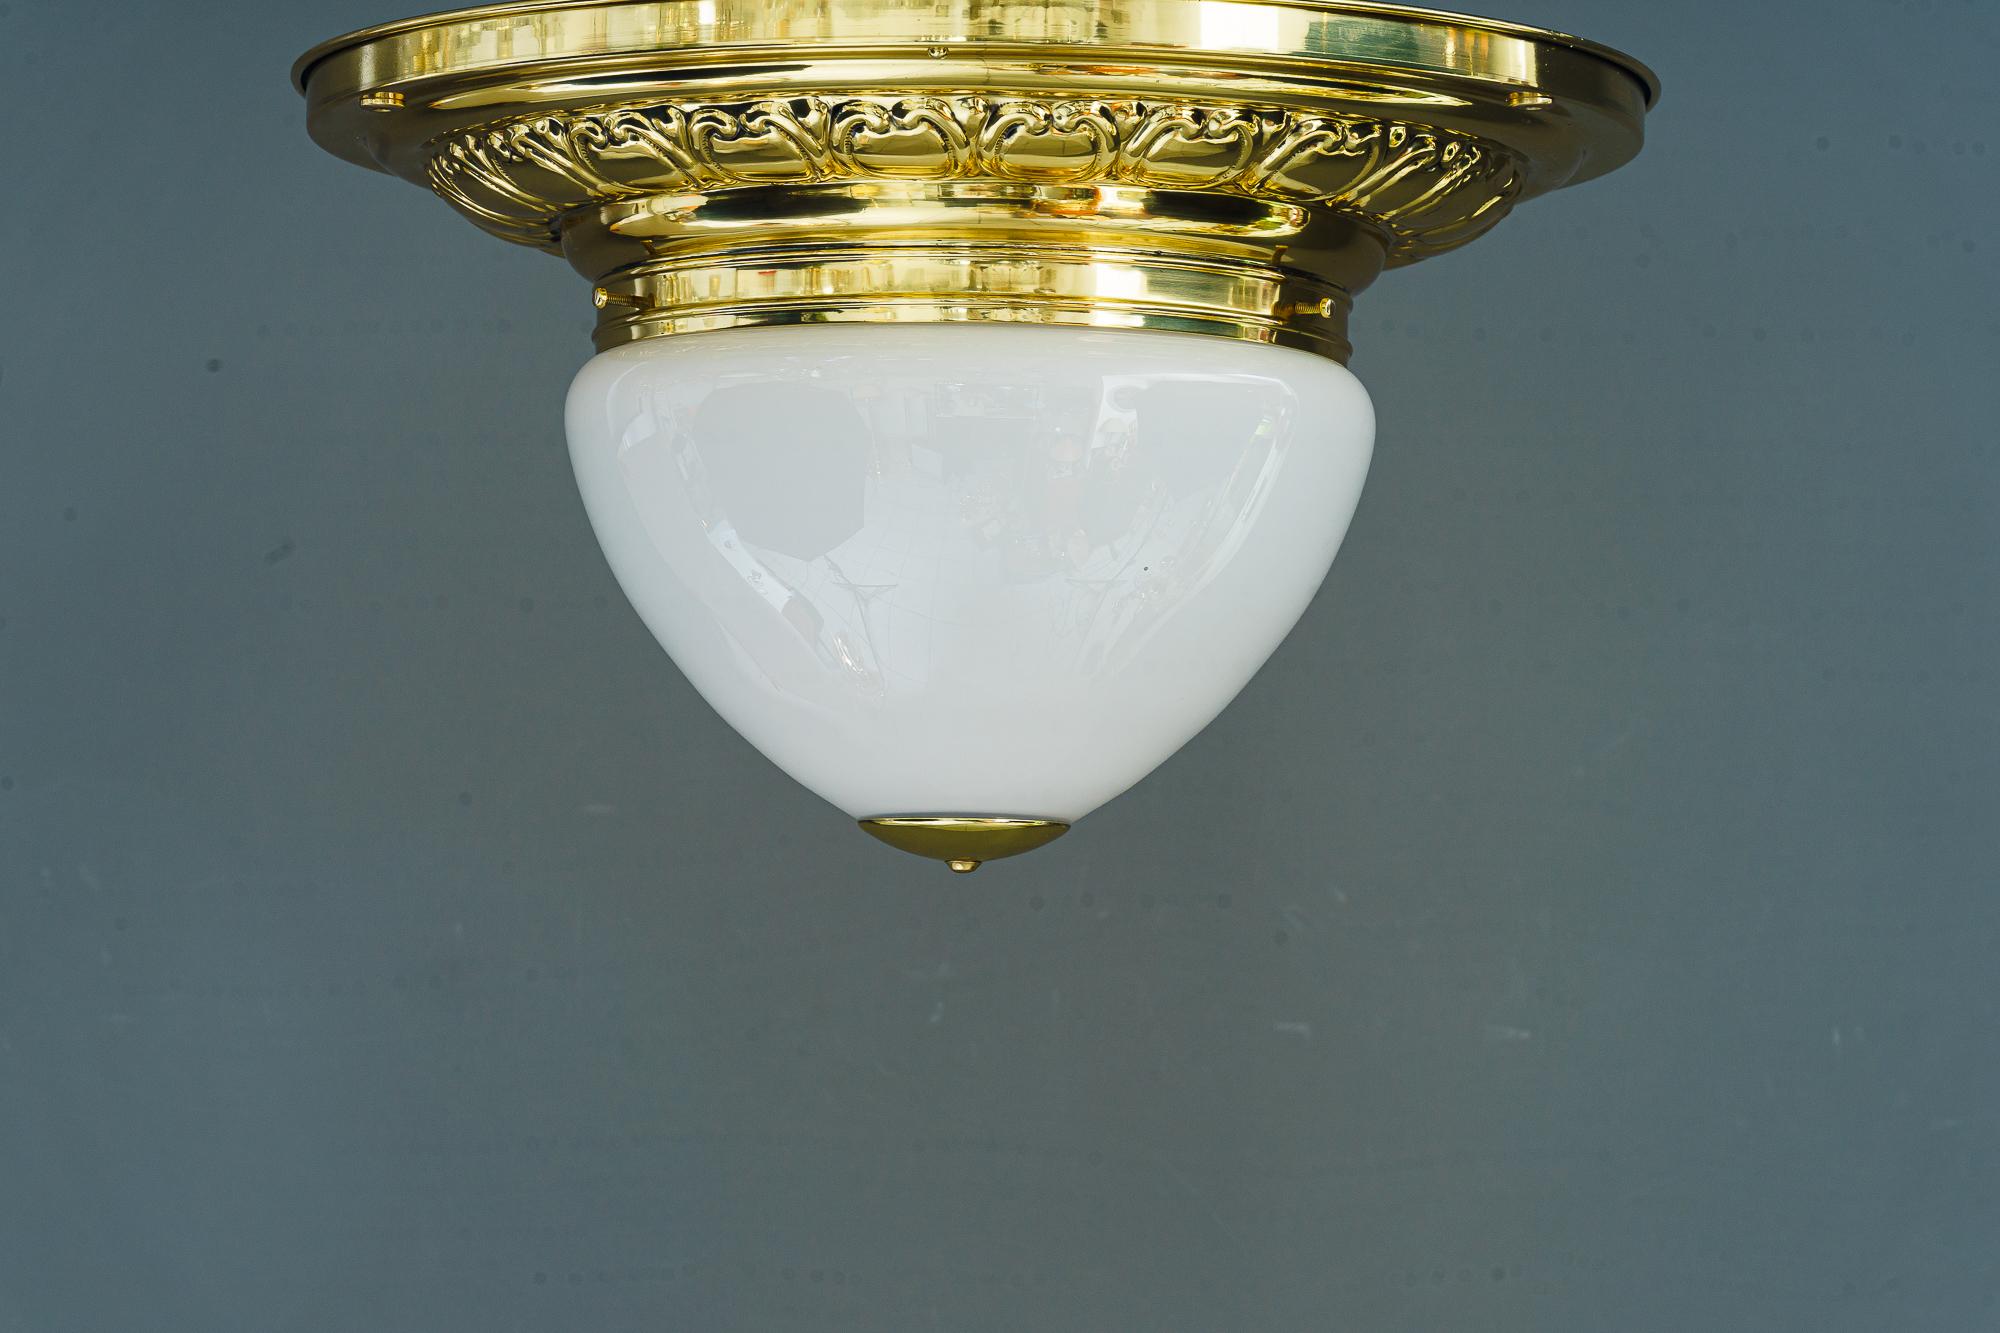 Big art deco ceiling lamp vienna around 1920s
Brass polished and stove enameled
Original antique glass shade